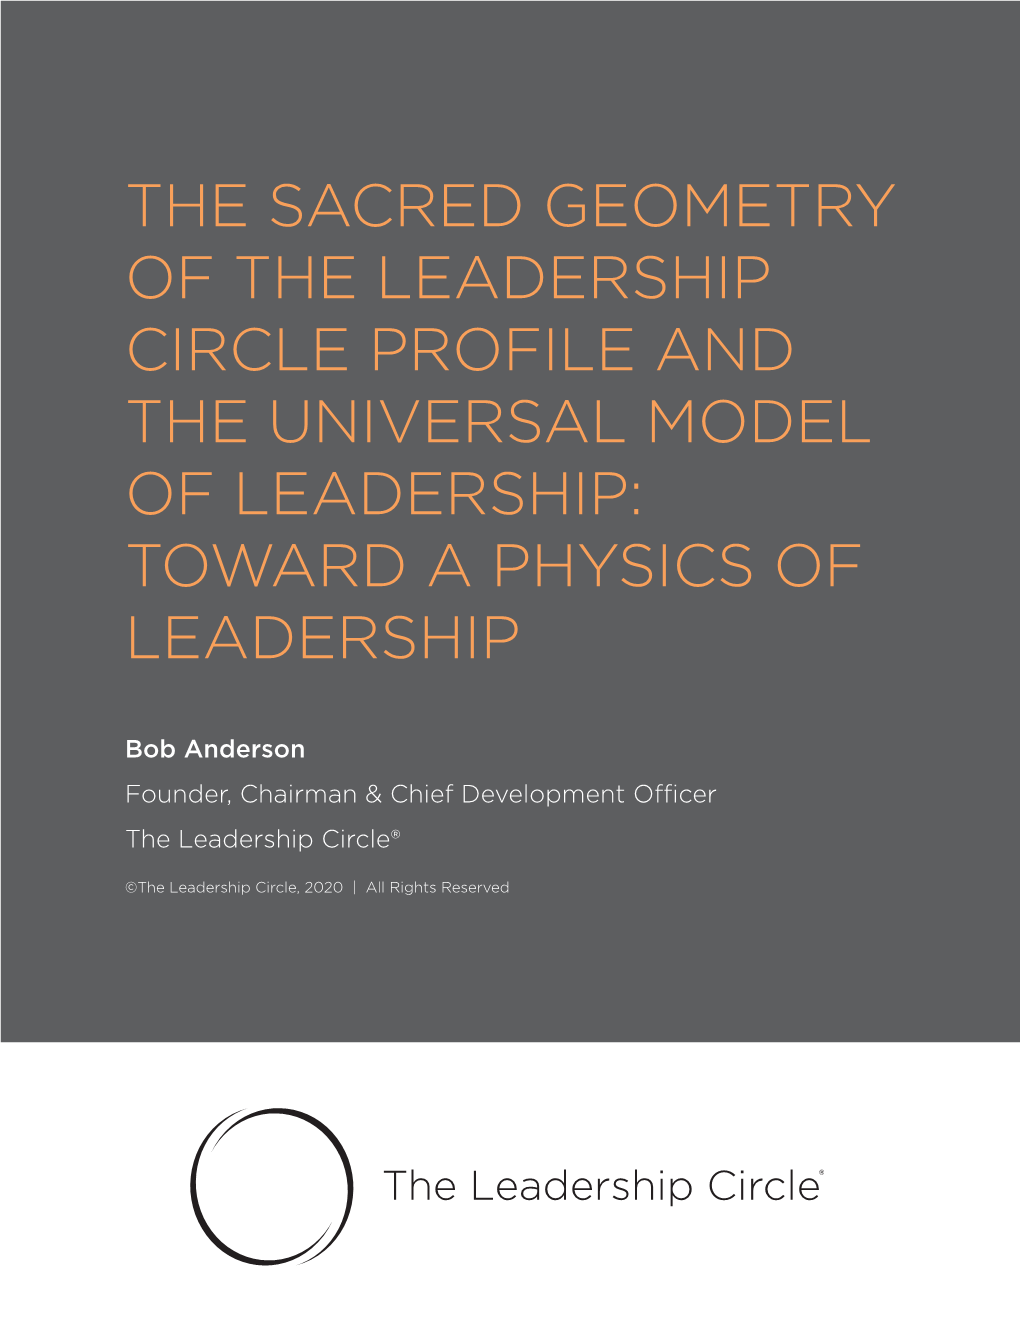 The Sacred Geometry of the Leadership Circle Profile and the Universal Model of Leadership: Toward a Physics of Leadership